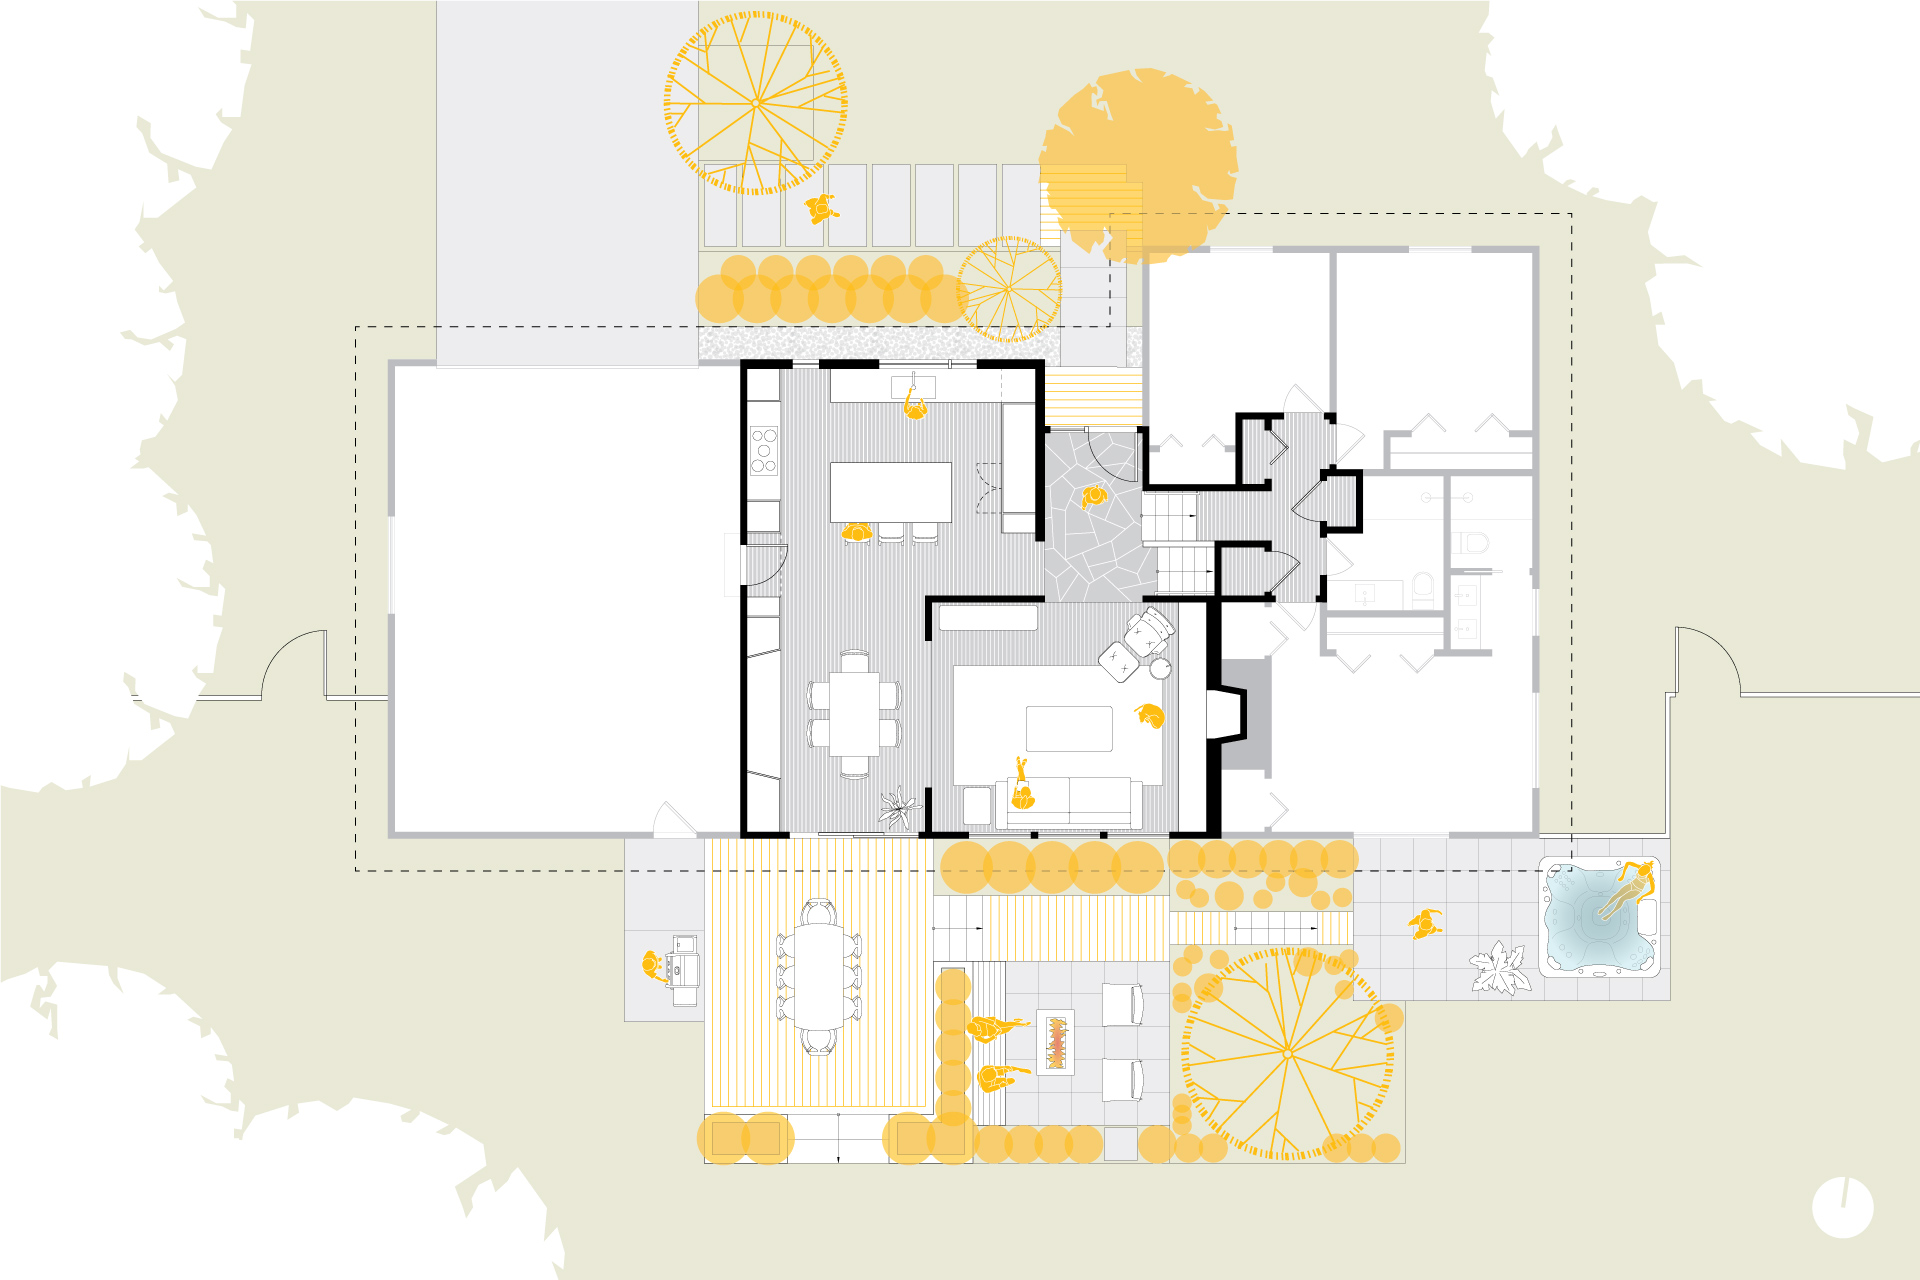 This is a floor plan drawing of the Hawkridge Modern after being renovated.